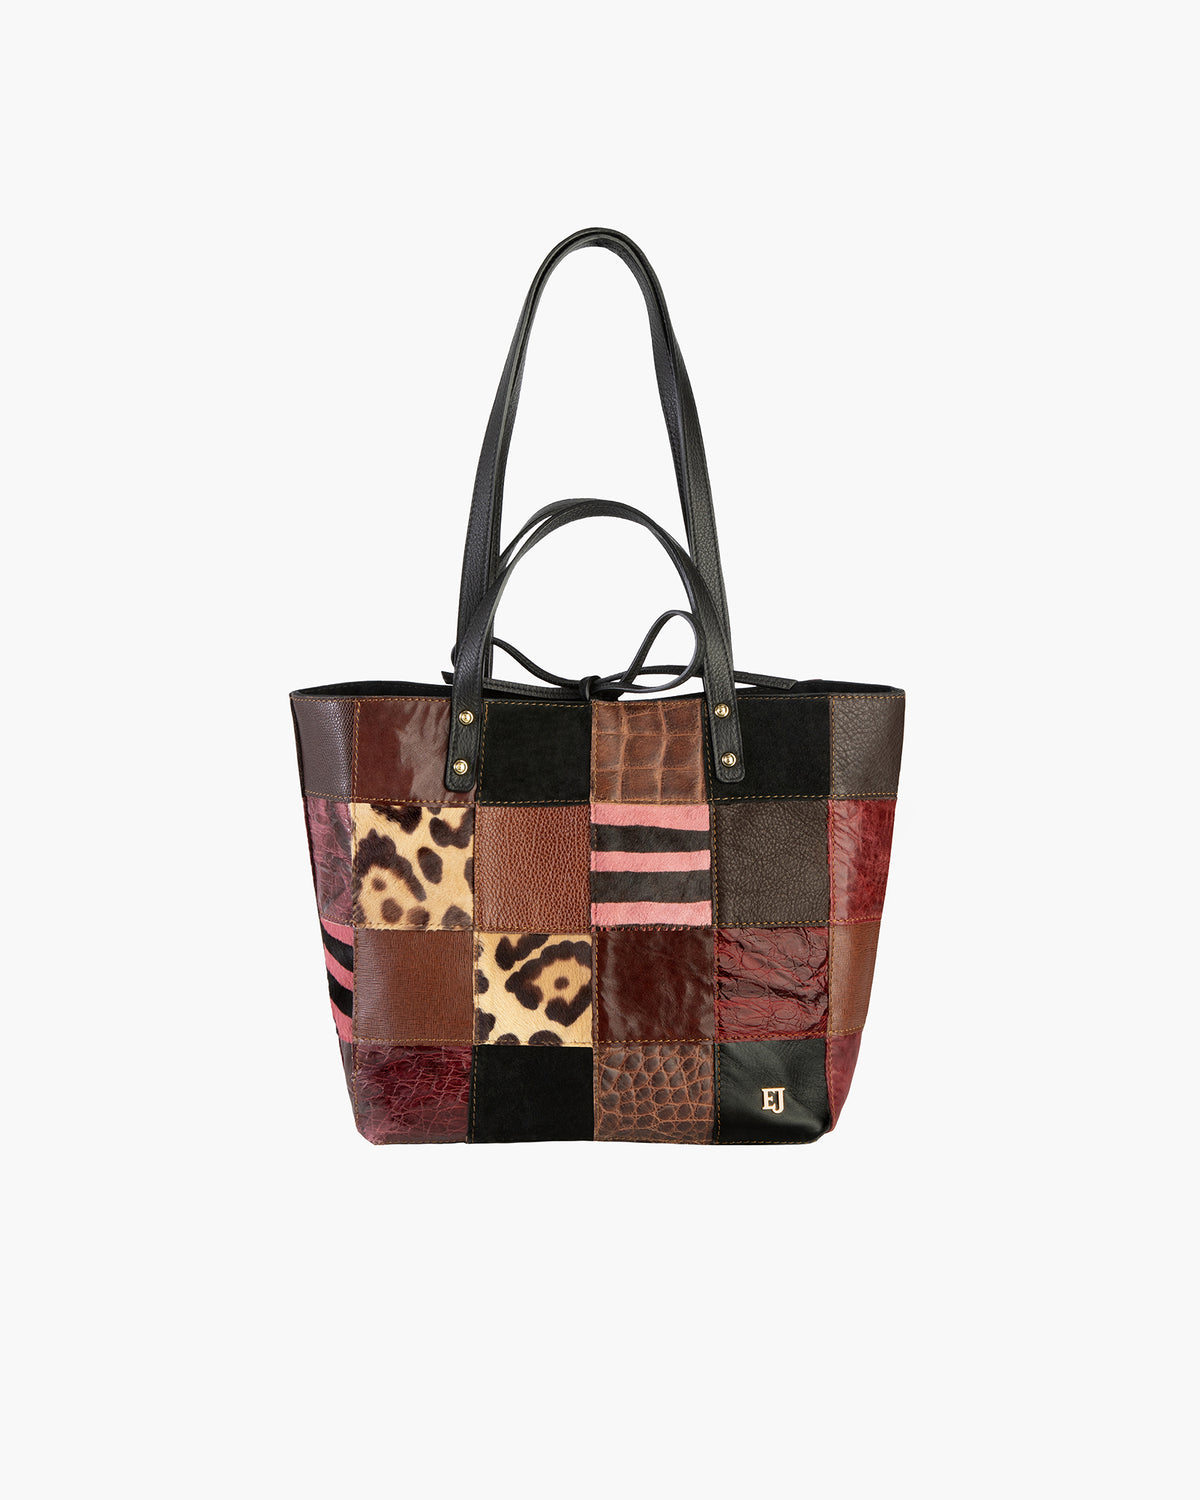 Eric Javits Women's Patchwork Tote Bag, Multicolor, Suede & Leather Patches, Dual Long Leather Straps, Water-Repellent, Midsize, Rust Mix